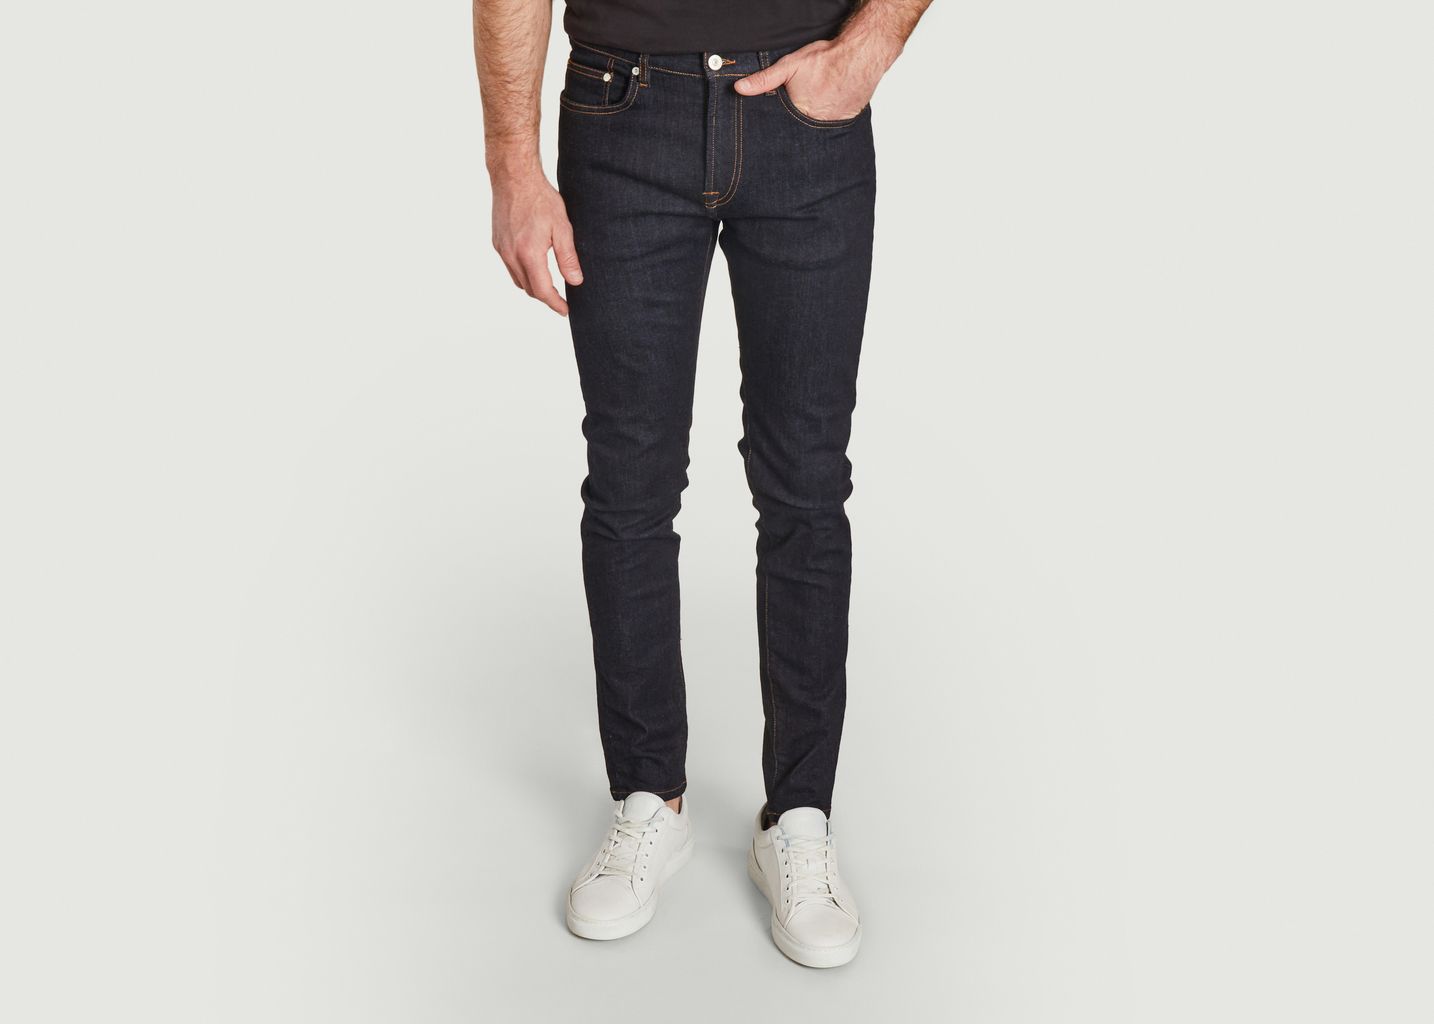 Brut jeans - PS by PAUL SMITH